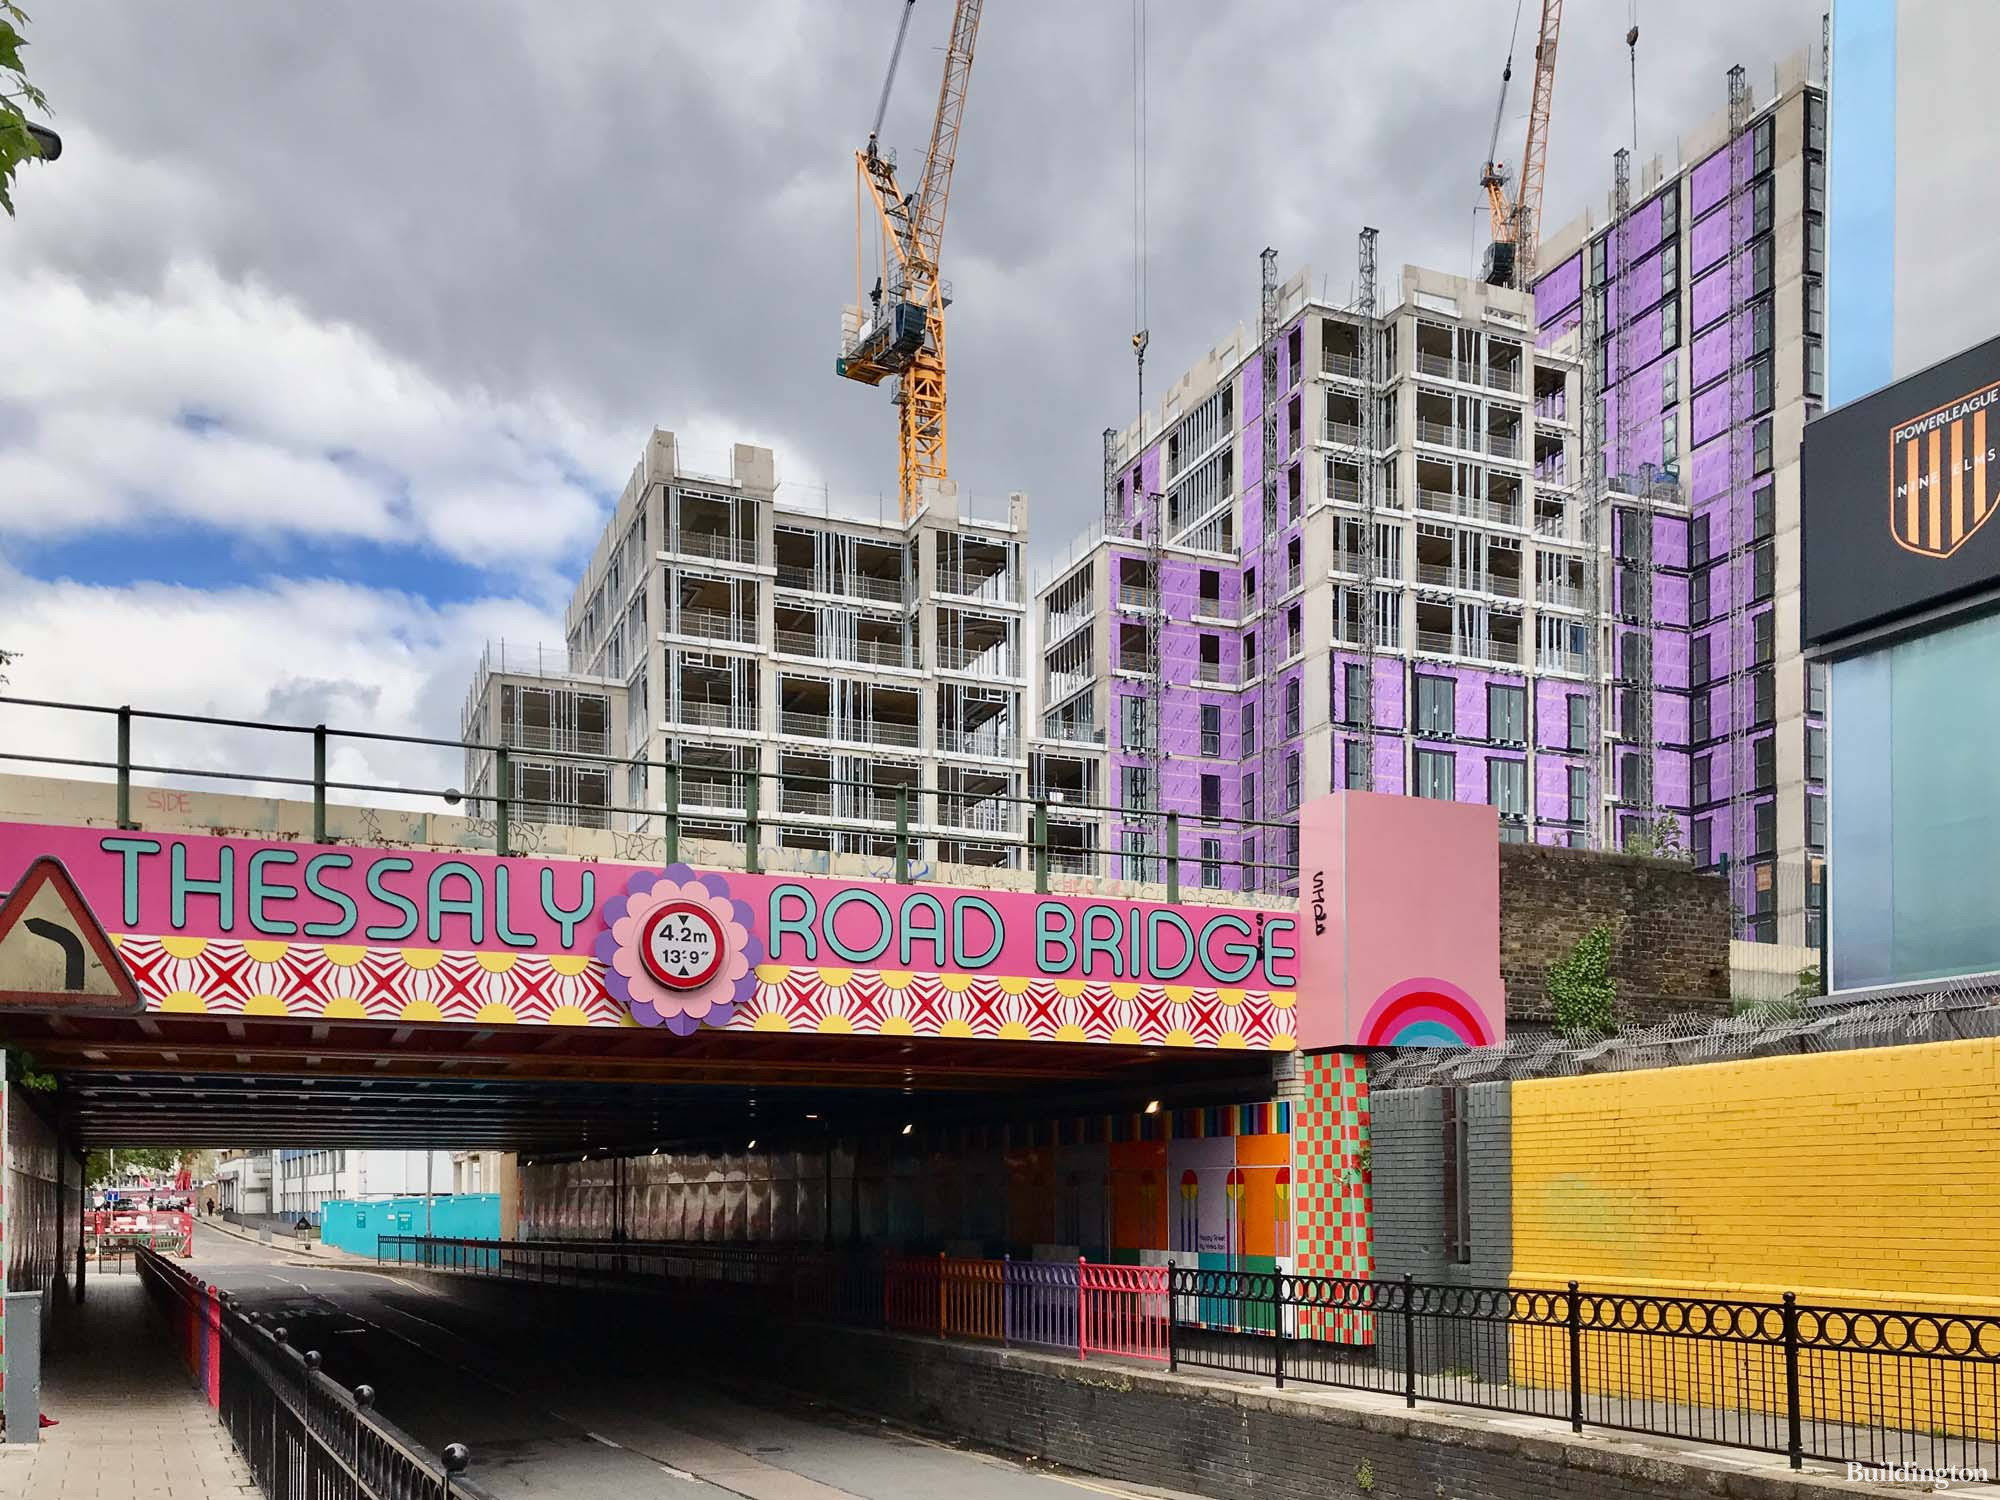 Battersea Power Station Phase 4a next to Thessaly Road Bridge decorated by Yinka Ilori ('Happy Street').